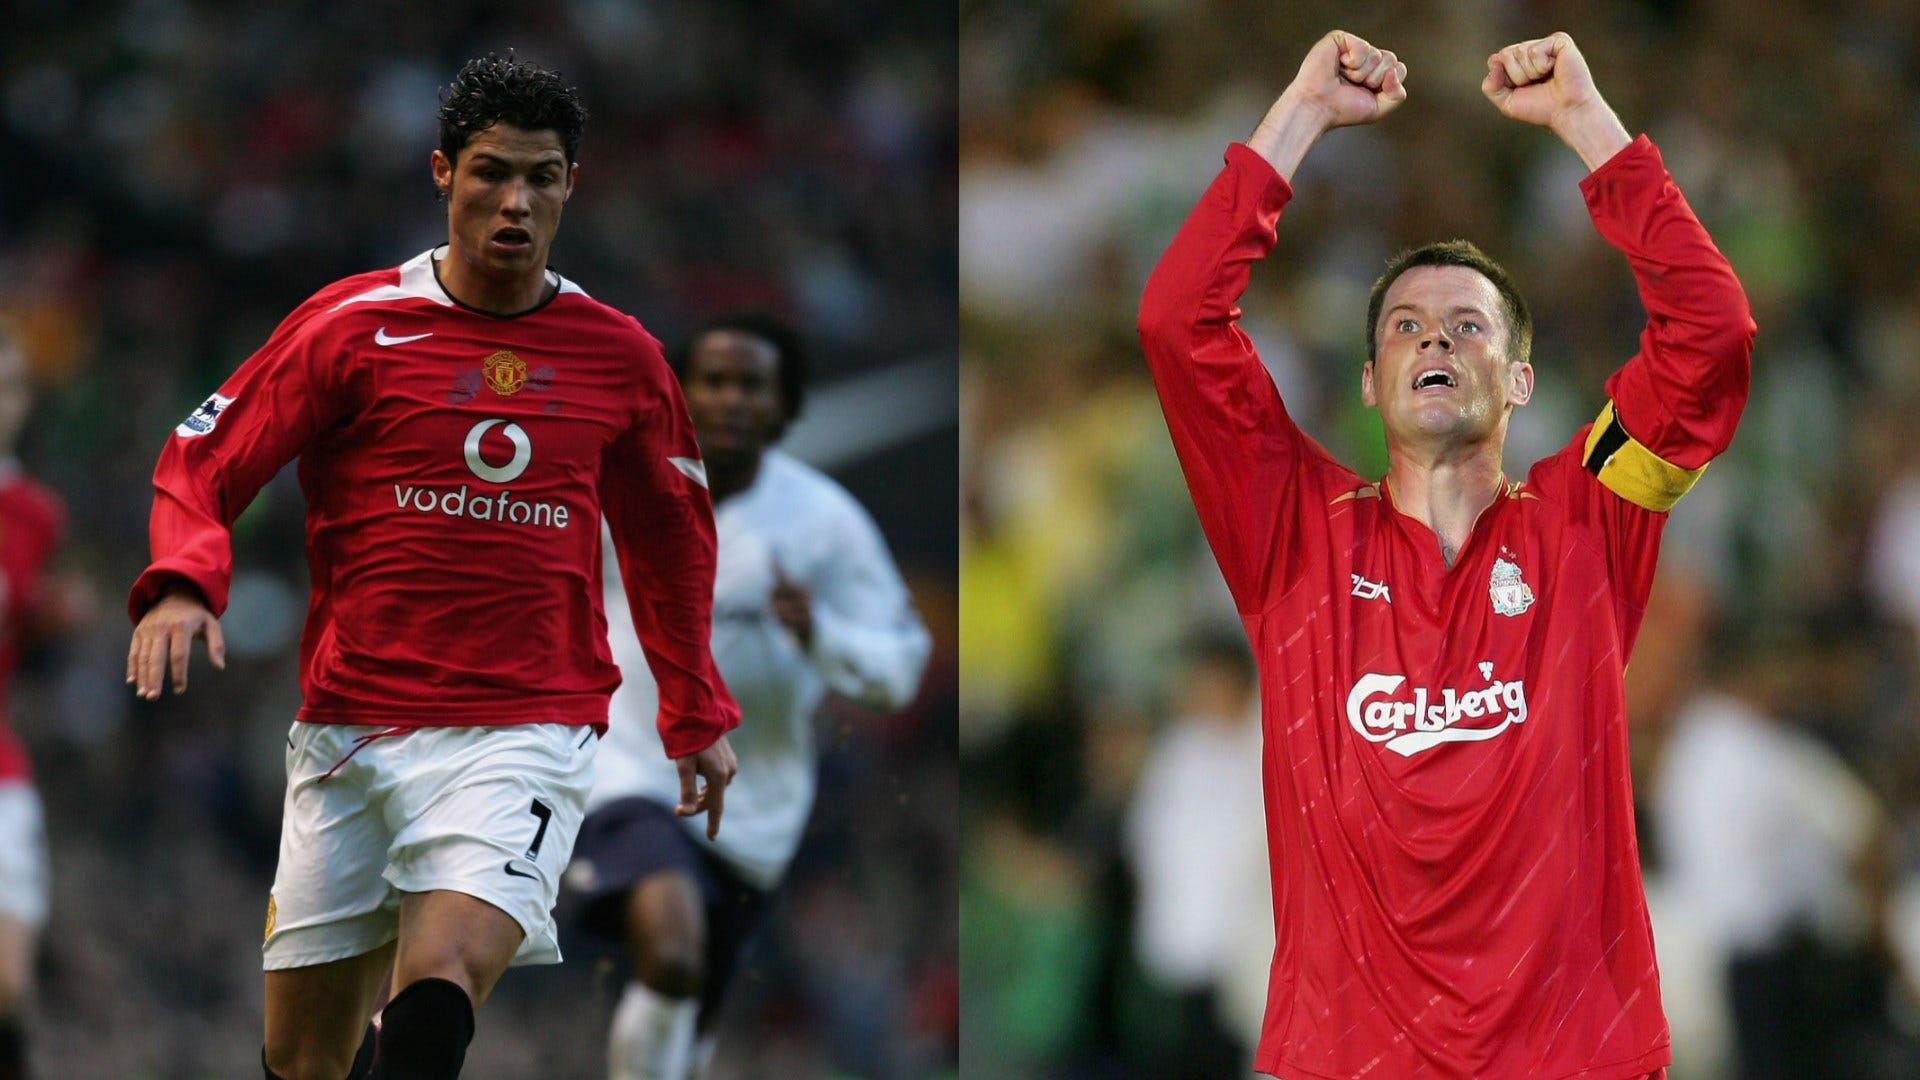 “Higher than Cristiano Ronaldo!” – Jamie Carragher celebrates his 2005 Ballon d’Or win, while Thierry Henry and Micah Richards mocking liverpool legend